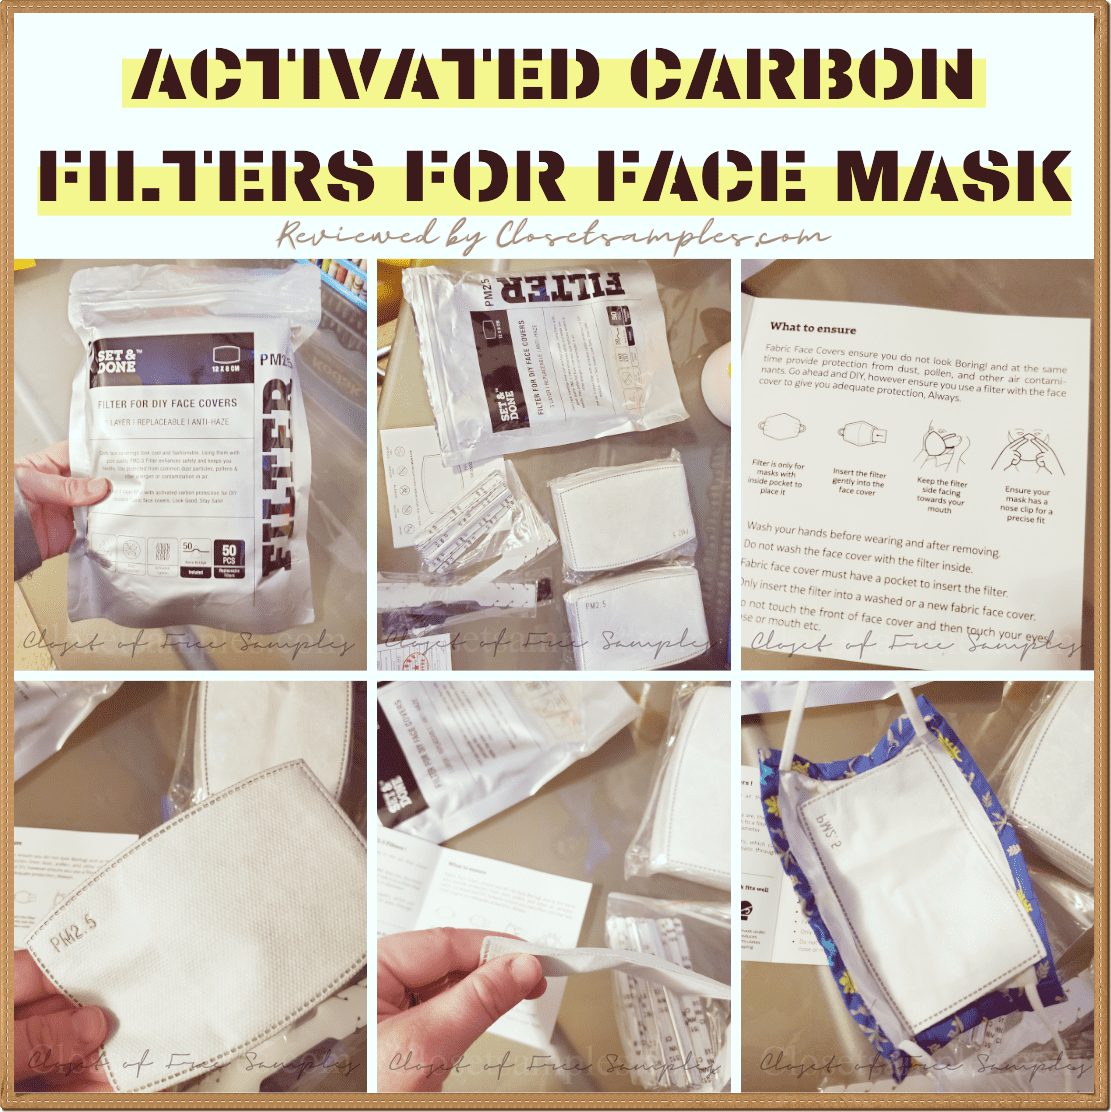 PM25-Activated-Carbon-Filters-for-Face-Mask-Review-closetsamples.png